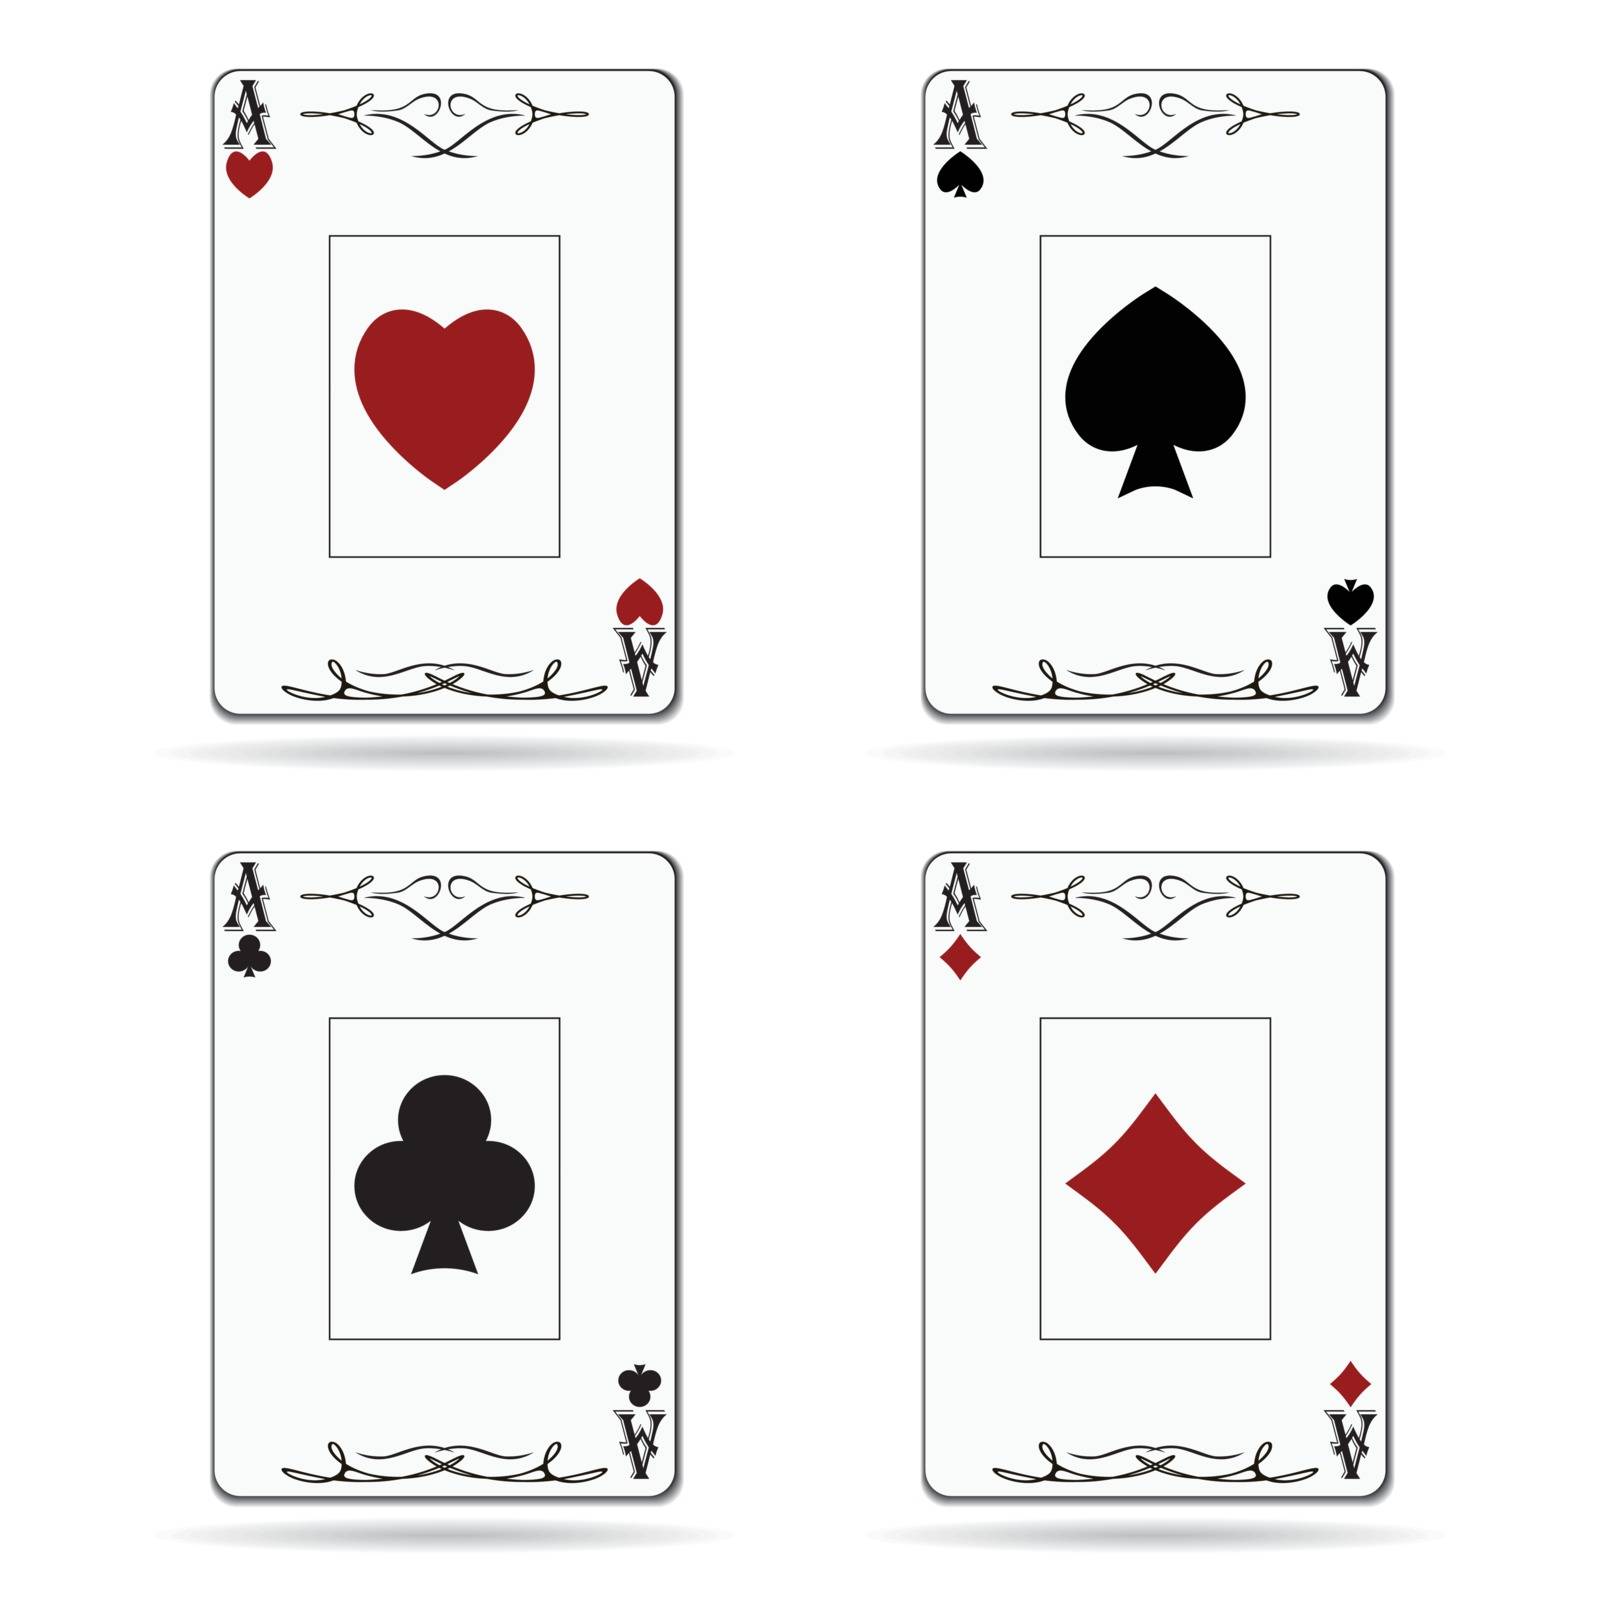 Ace of spades, ace of hearts, ace of diamonds, ace of clubs poker cards isolated on white background by Lemon_workshop